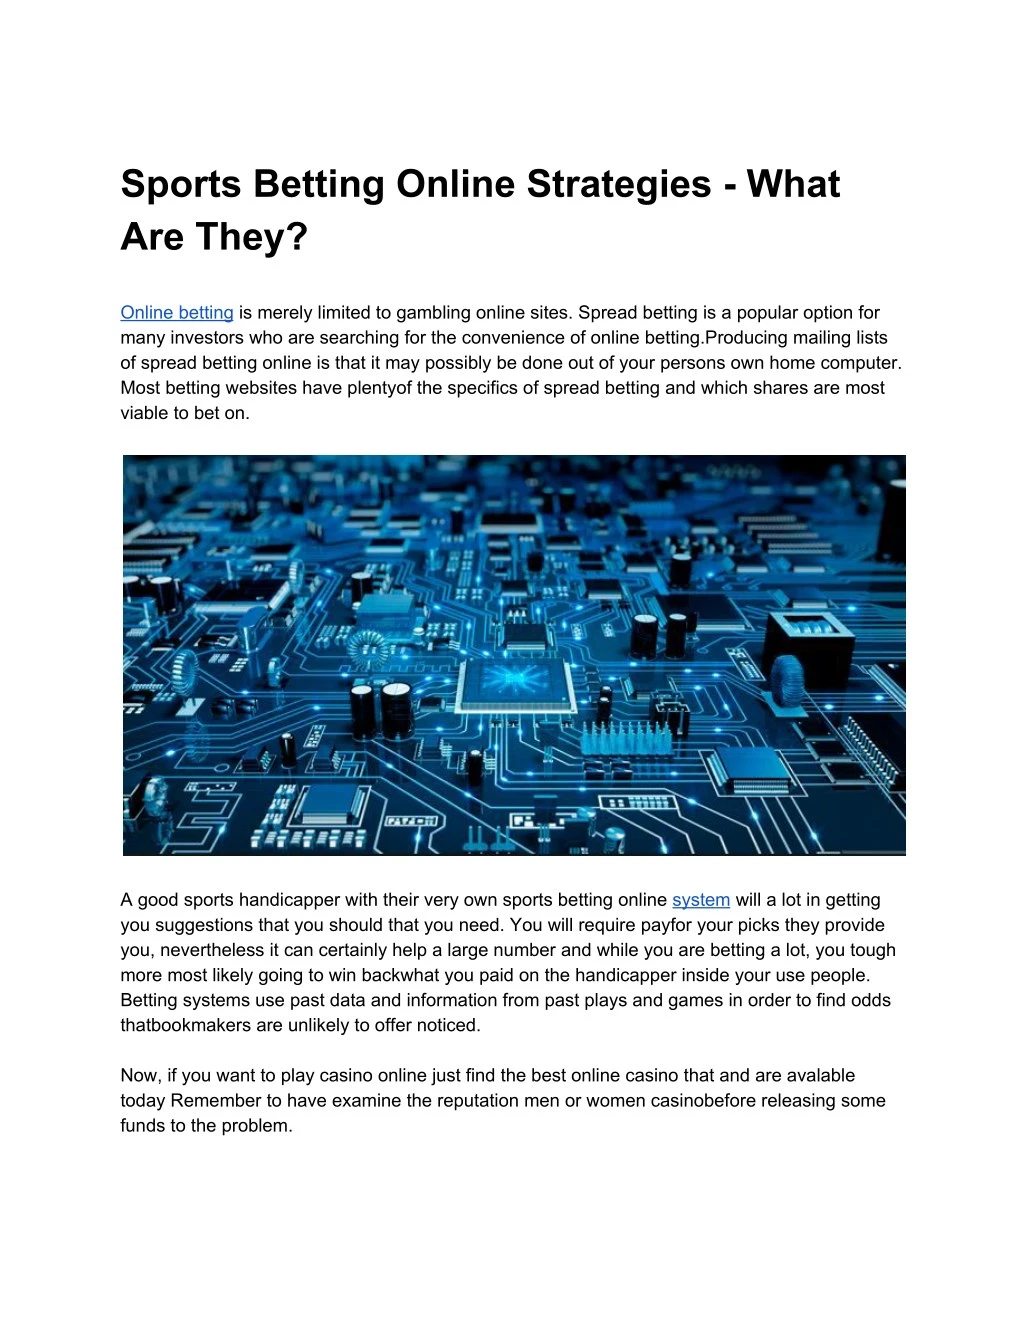 sports betting online strategies what are they